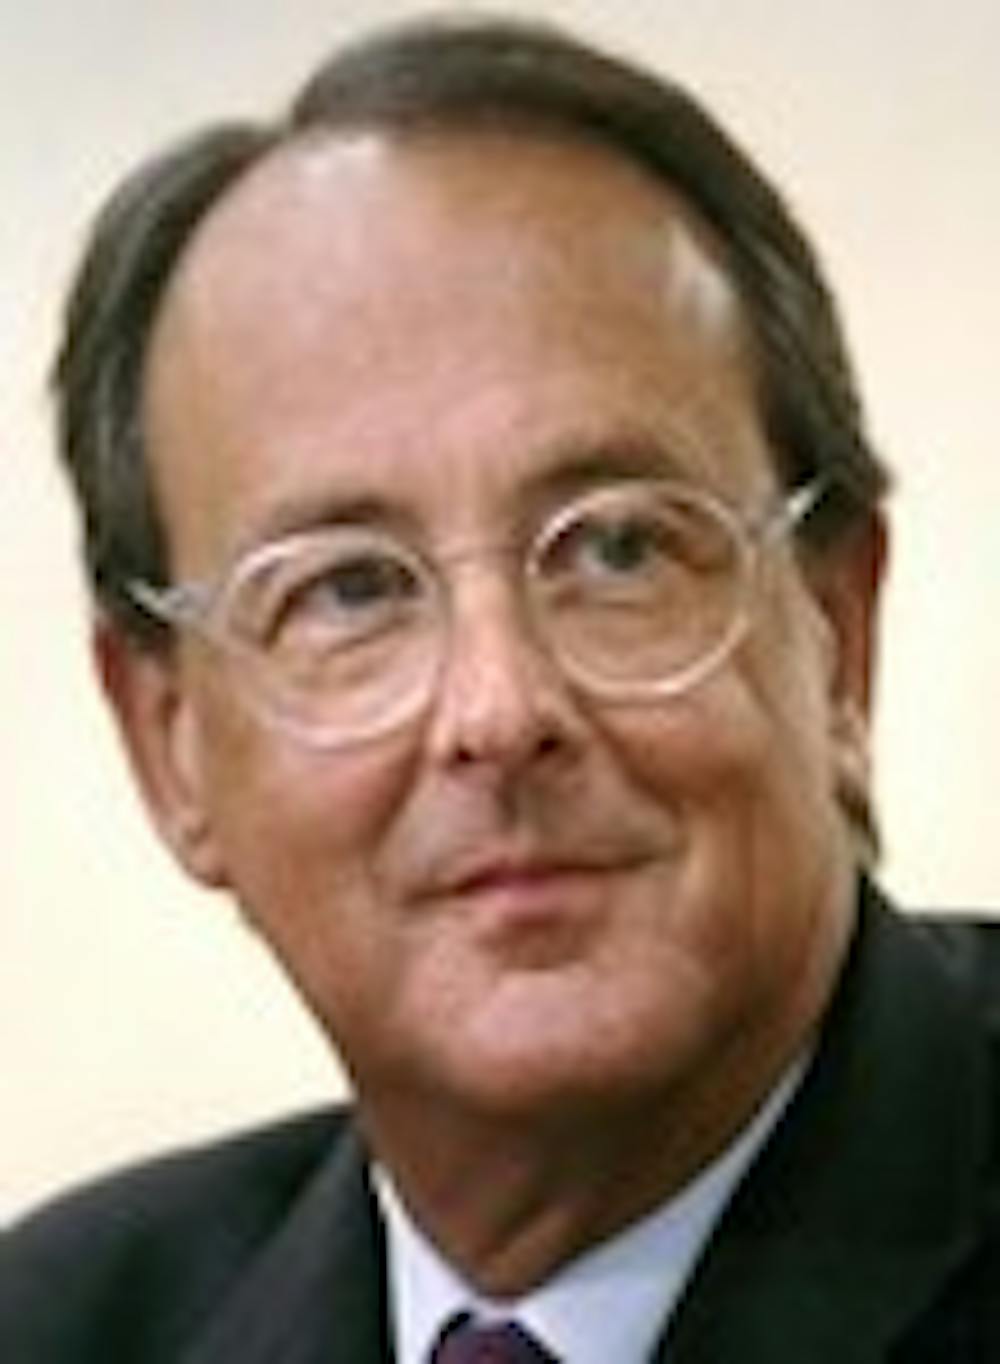 Erskine Bowles, 64, announced that he will retire after nearly five years with the UNC system.